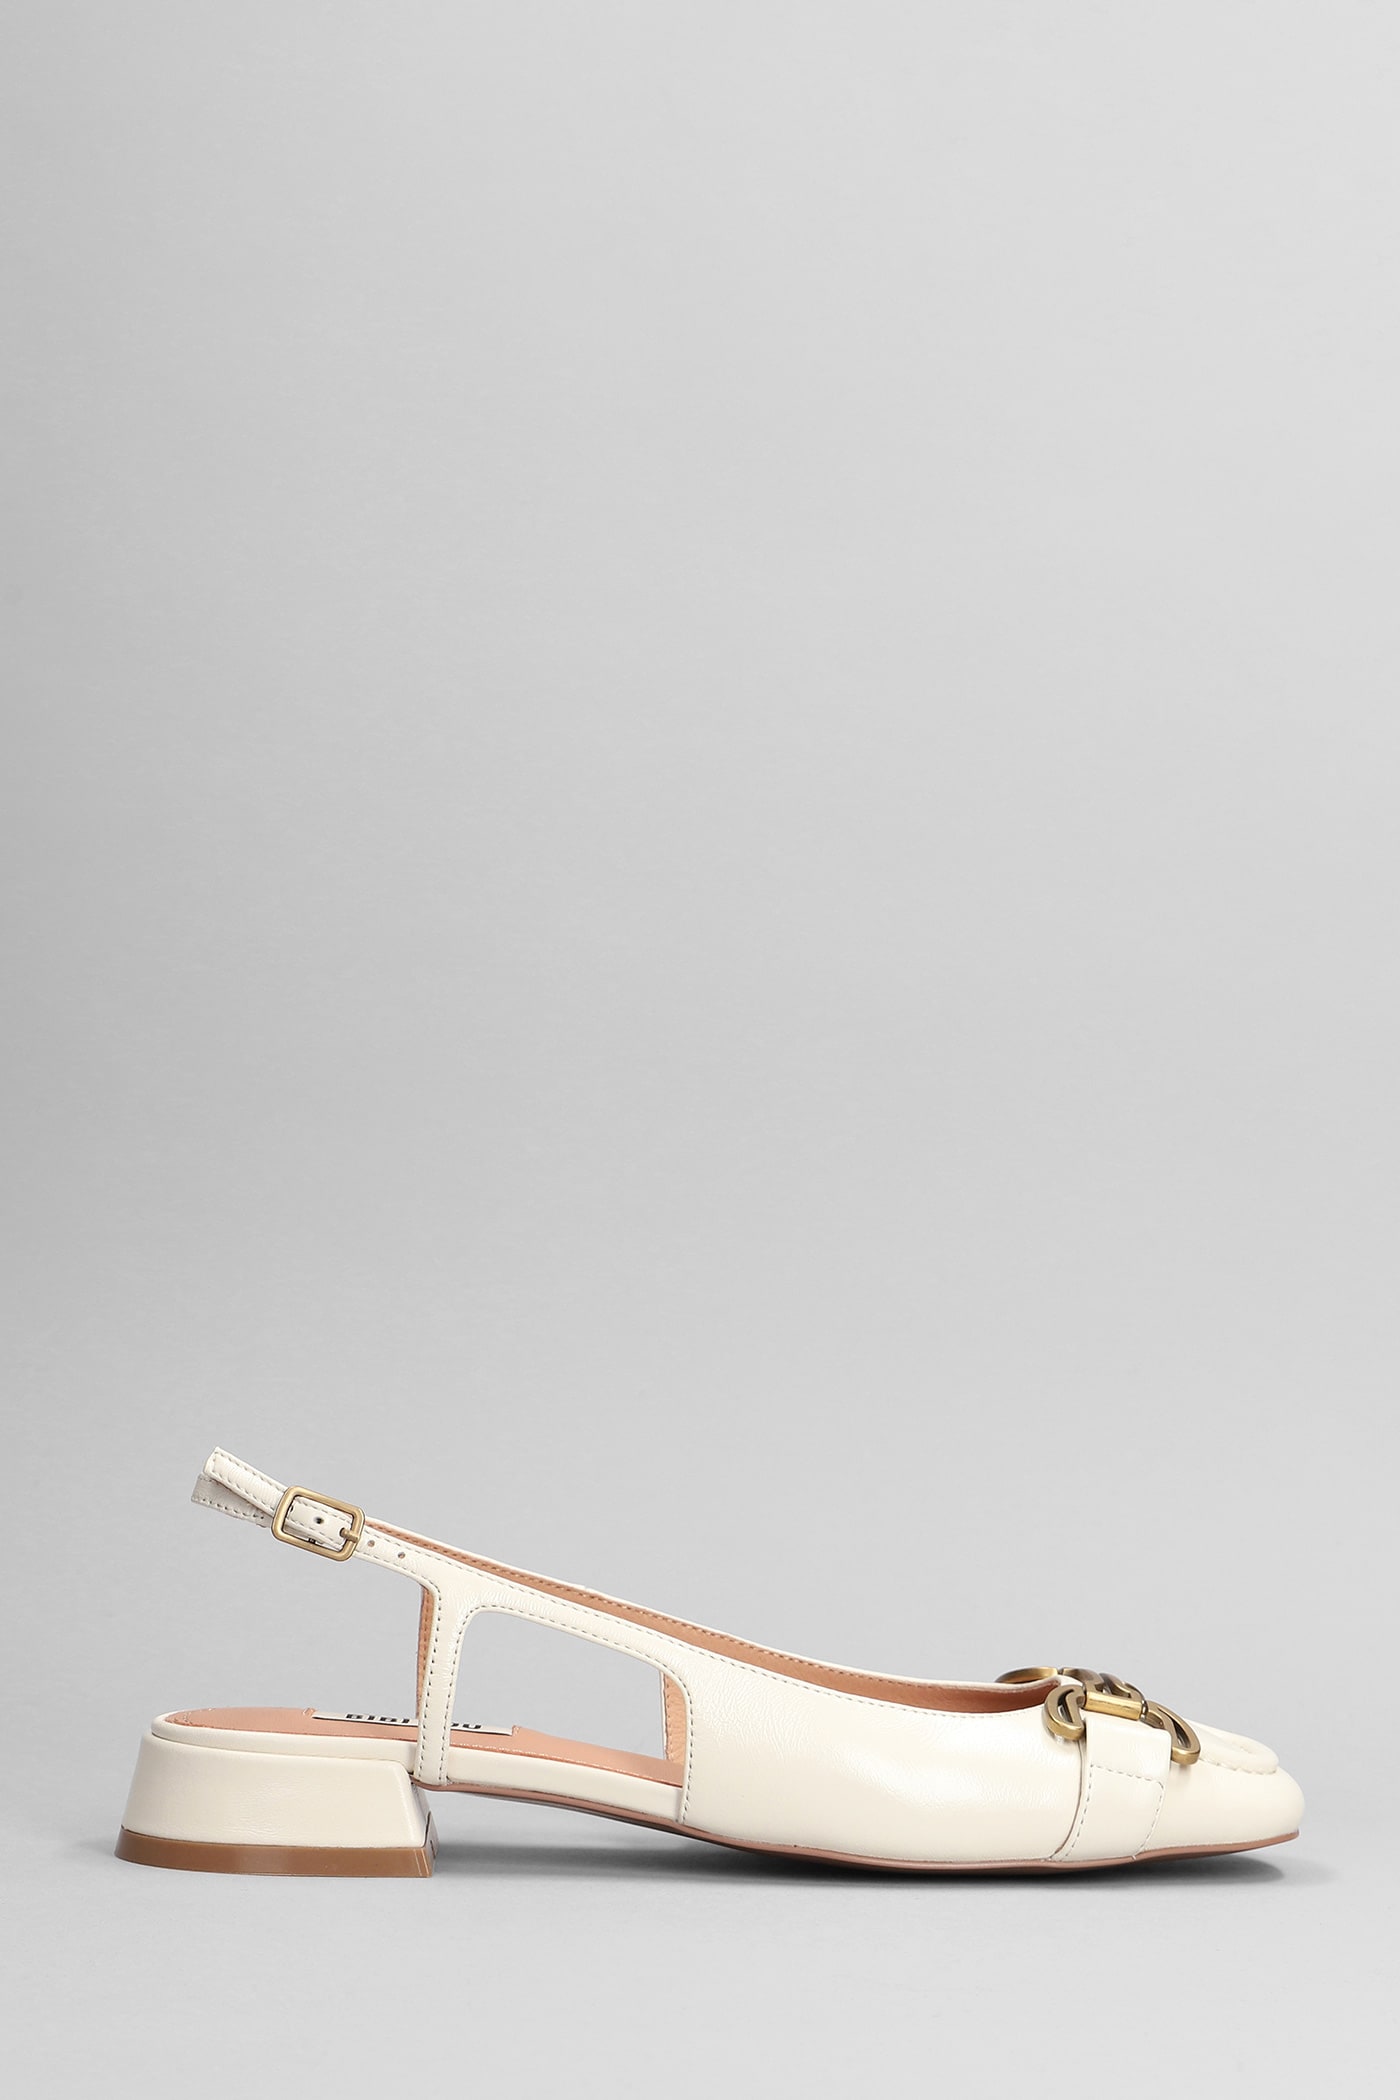 Renee 25 Pumps In White Leather